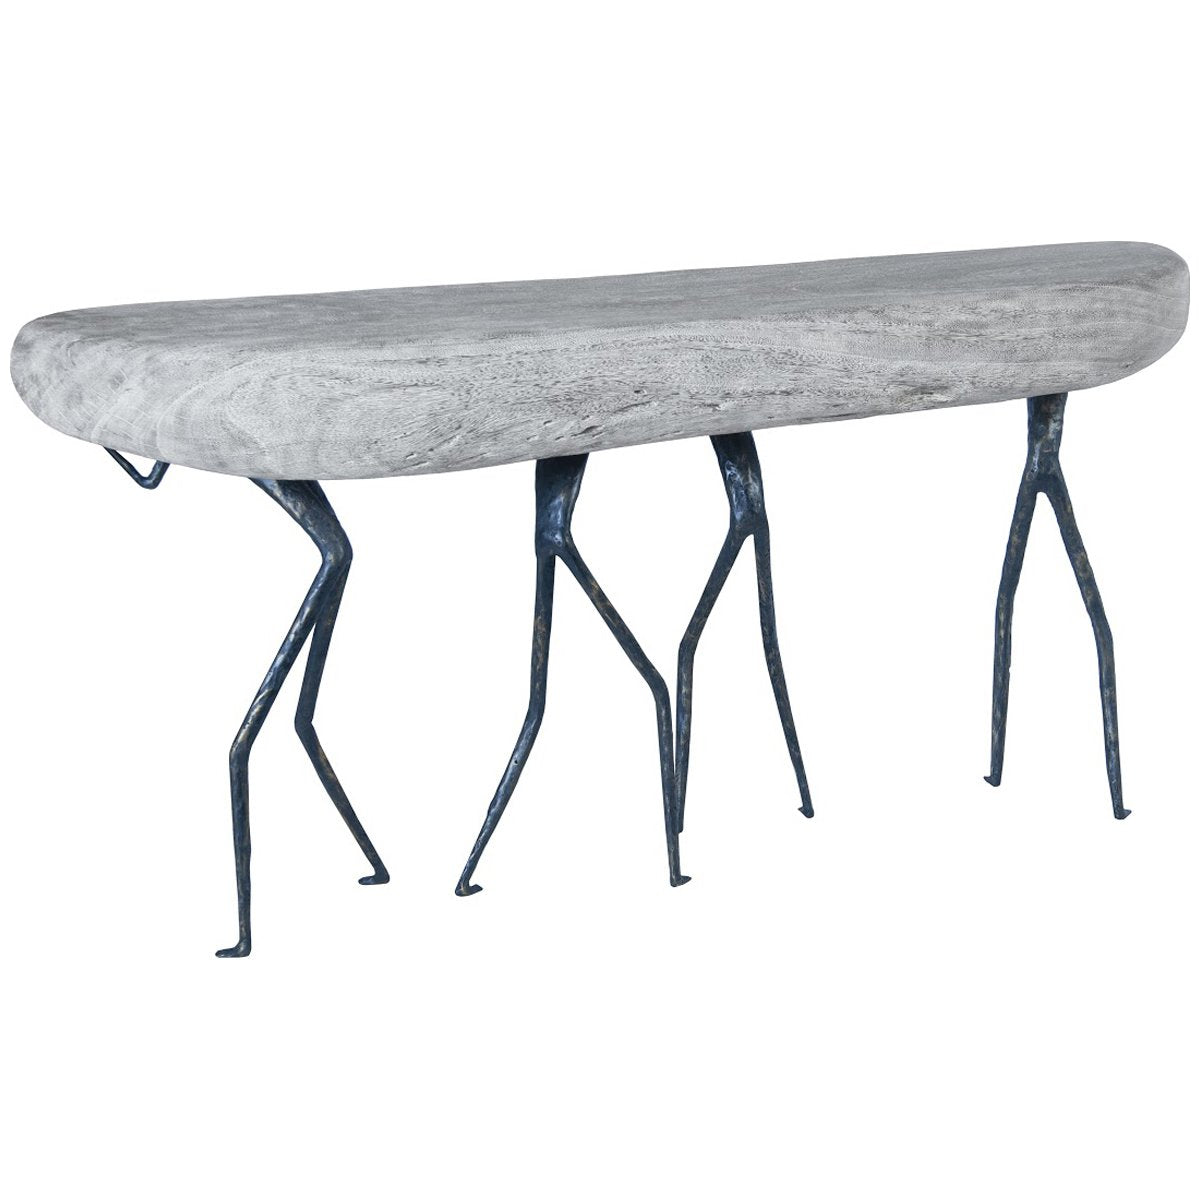 Phillips Collection Atlas Console Table, Gray Stone